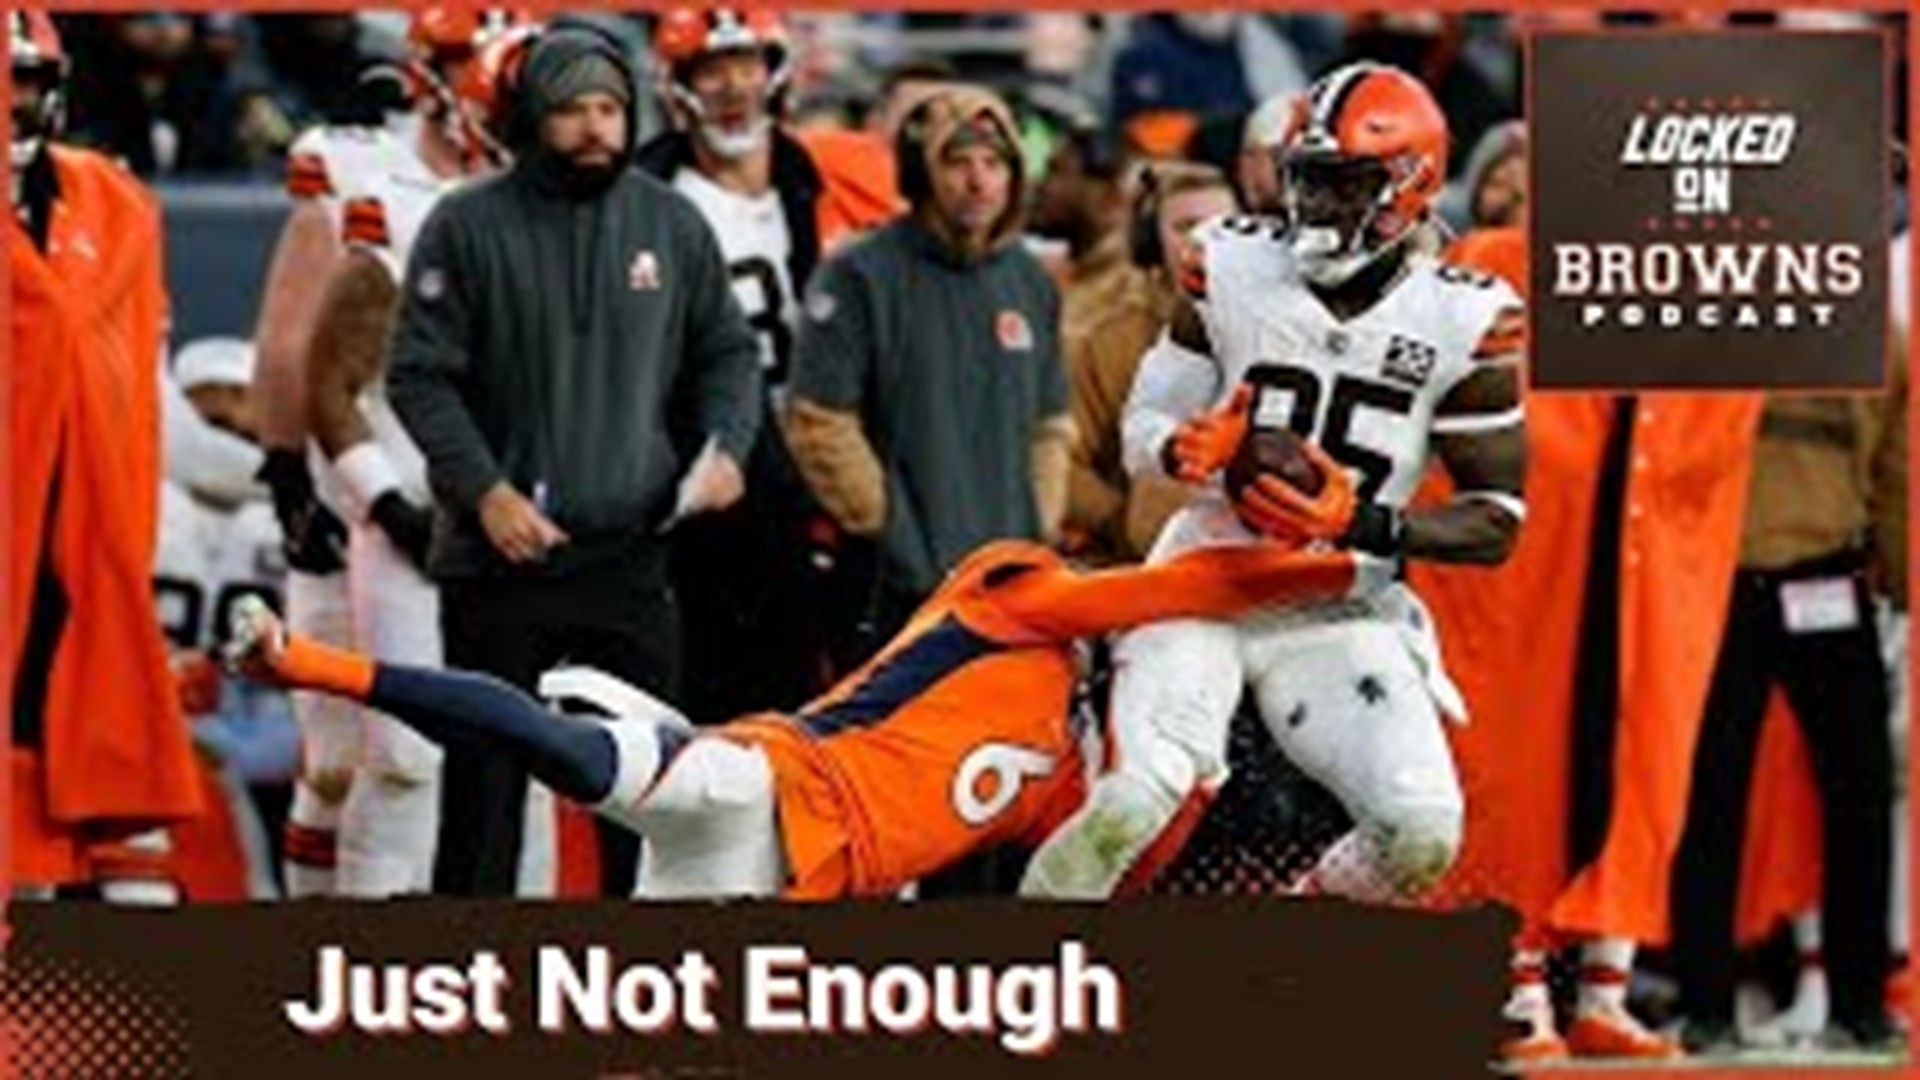 The Cleveland Browns lose a tough one in Denver. Dorian Thompson-Robinson started slow but really picked it up until leaving the game with a concussion.